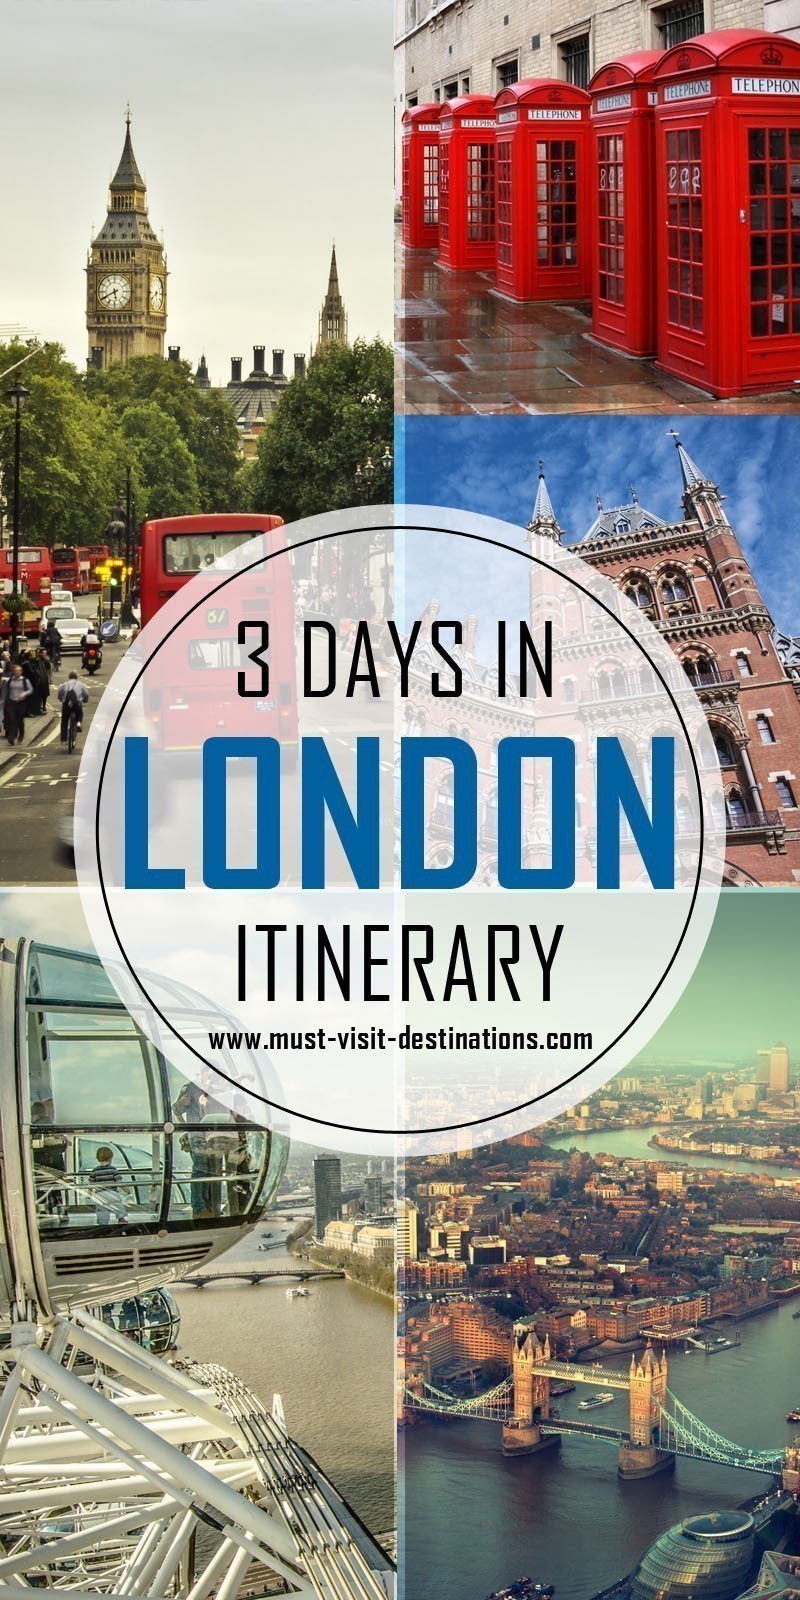 Only 3 days in London? No problem! Check out this sample itinerary! #must-visit #destination #london